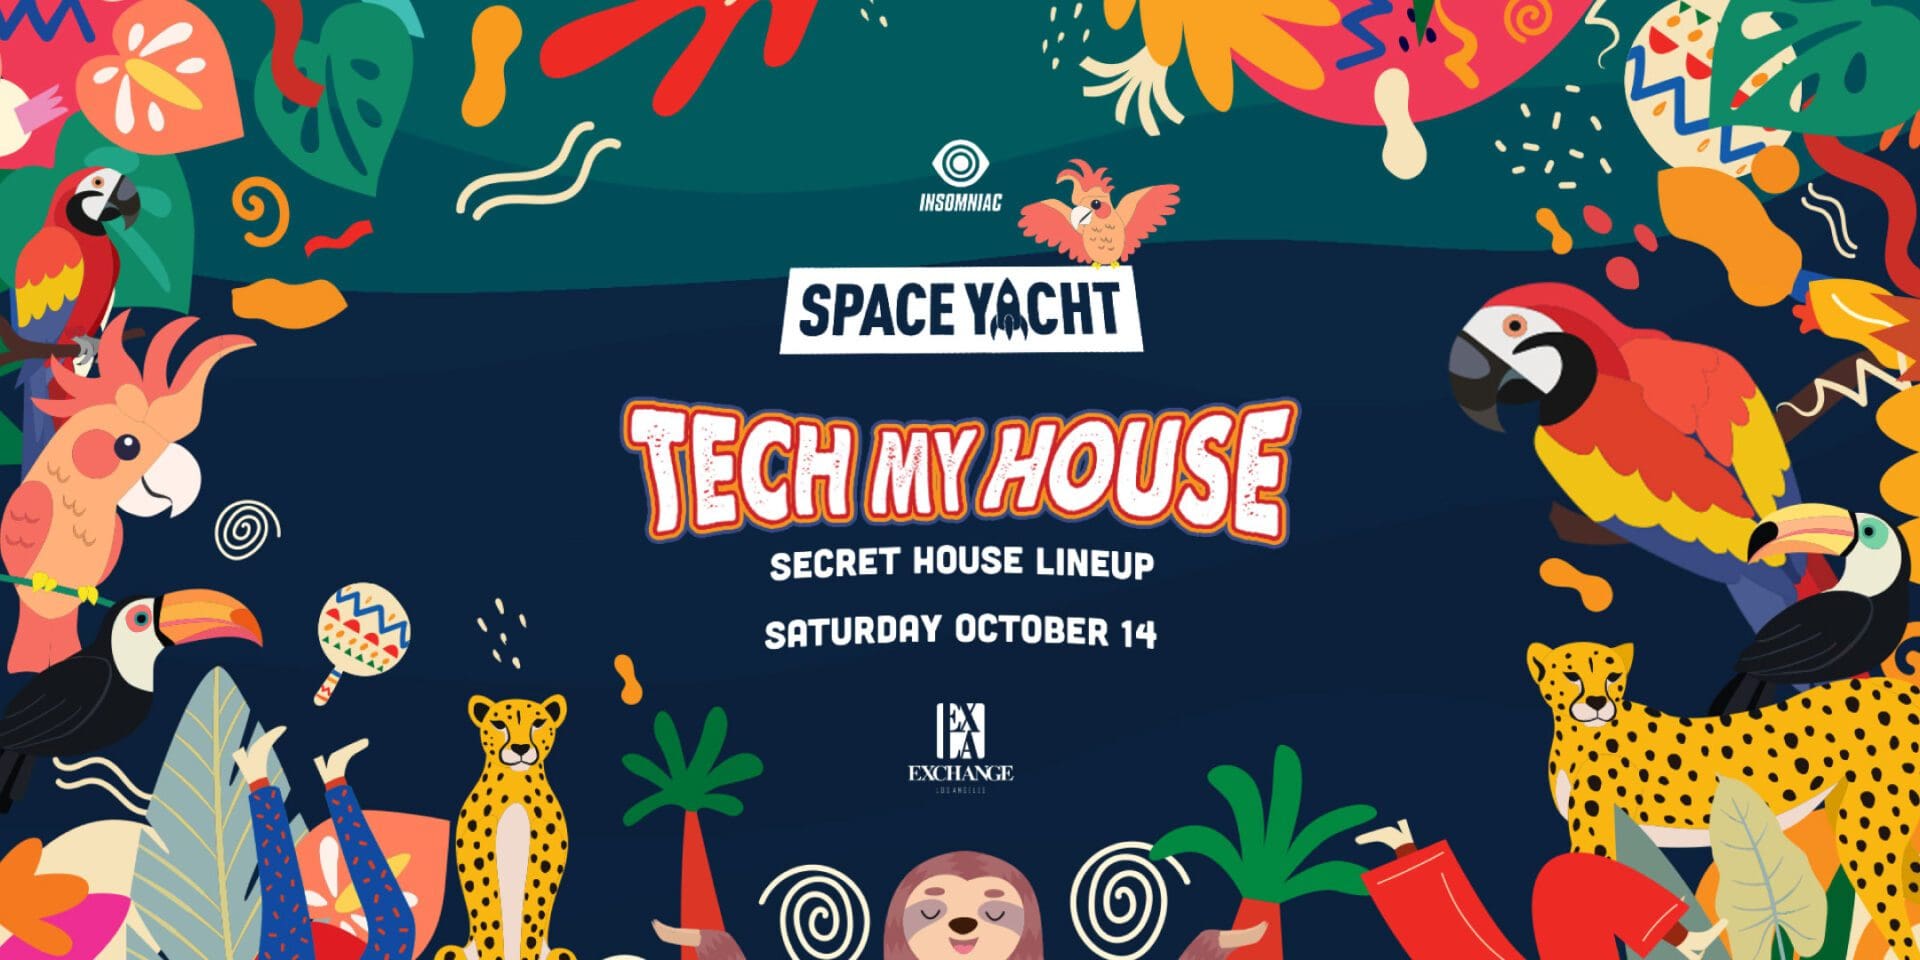 space yacht los angeles photos